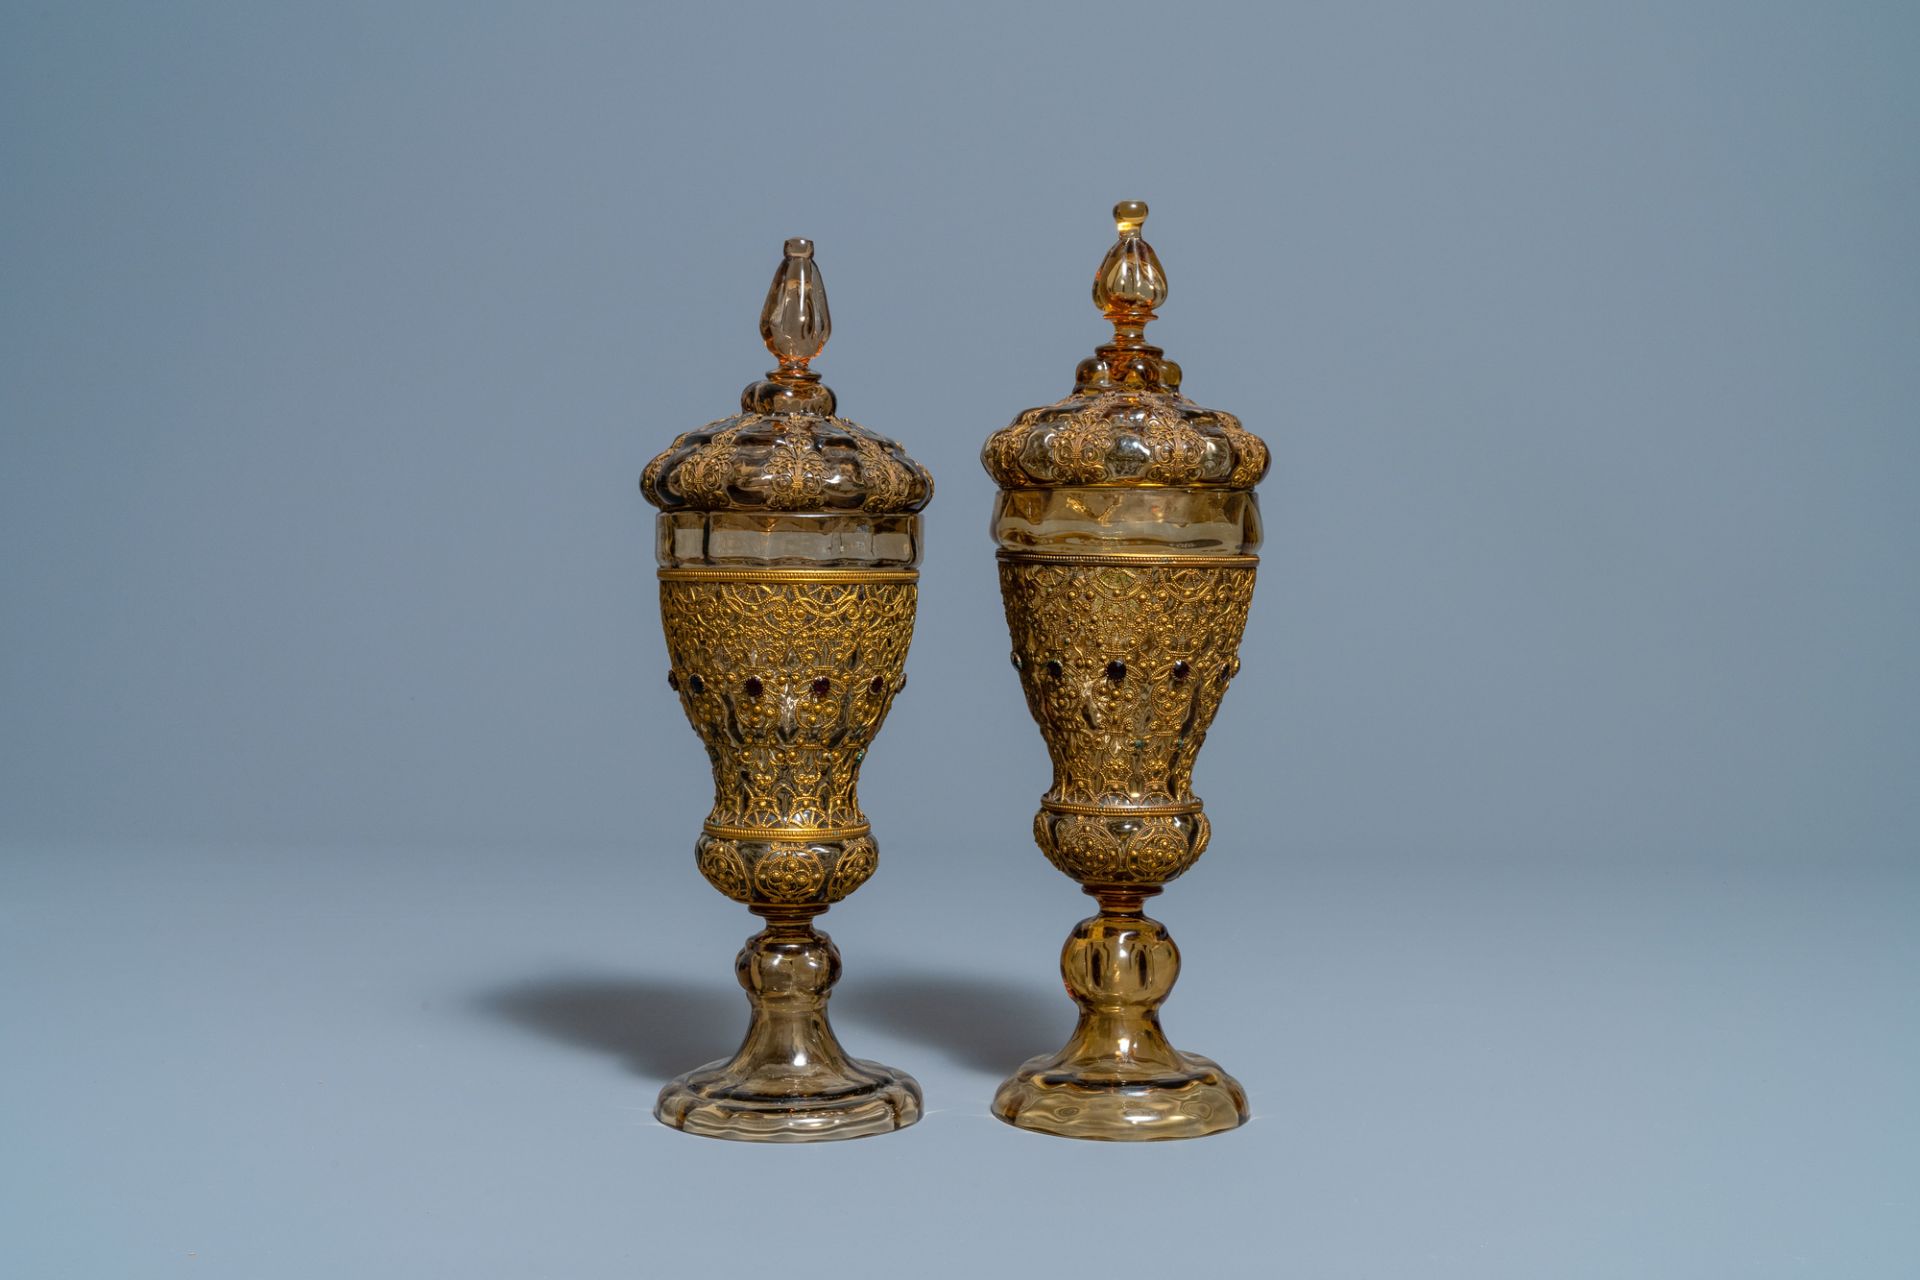 A pair of Russian or Eastern-European gilt copper and glass-inlaid glass goblets and covers, 19th C. - Image 2 of 6